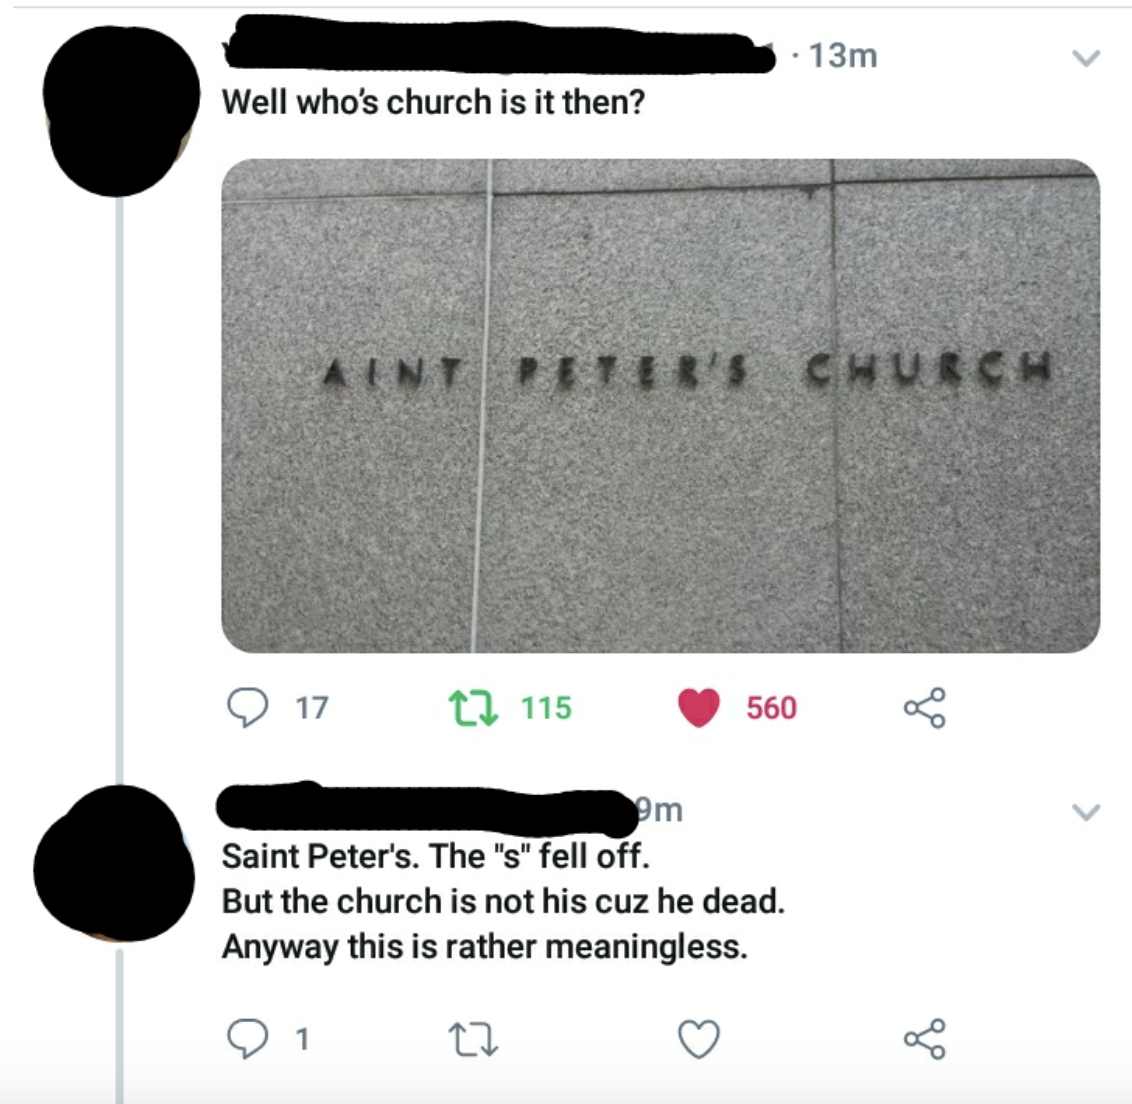 "Saint Peter's. The "s" fell off."